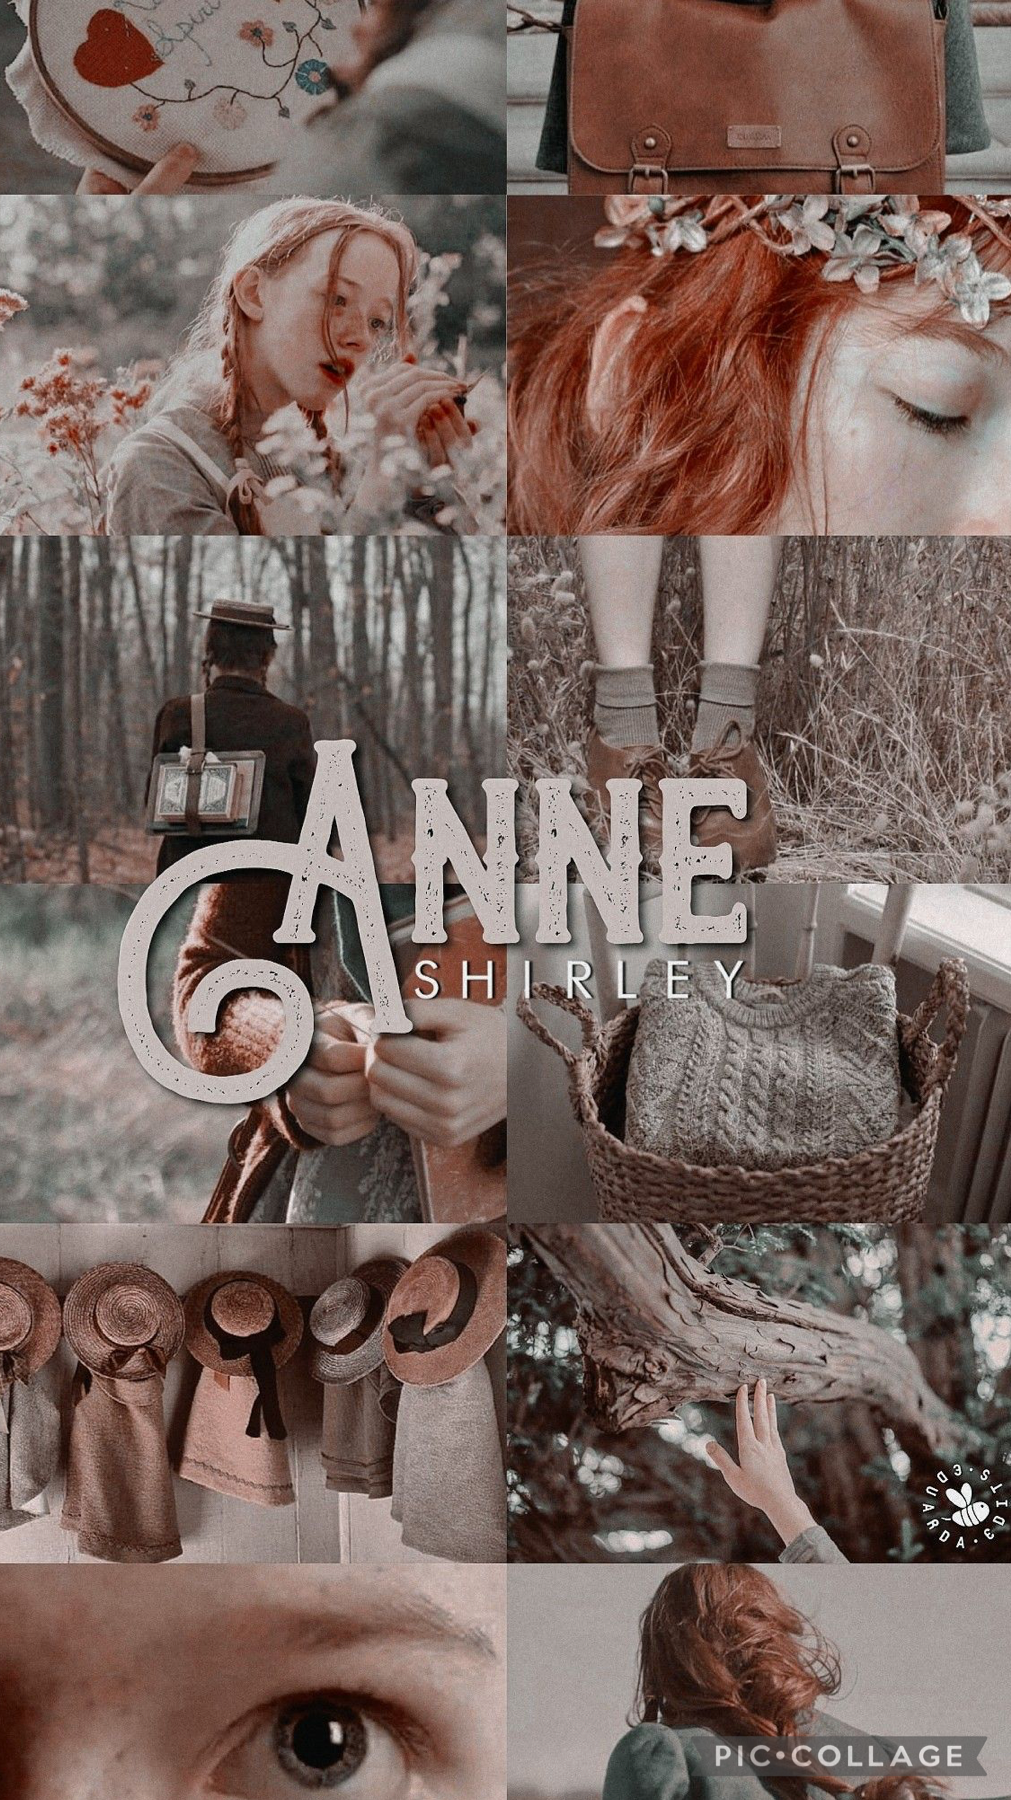 Anne collage! For shiningwaters- and Caress- 